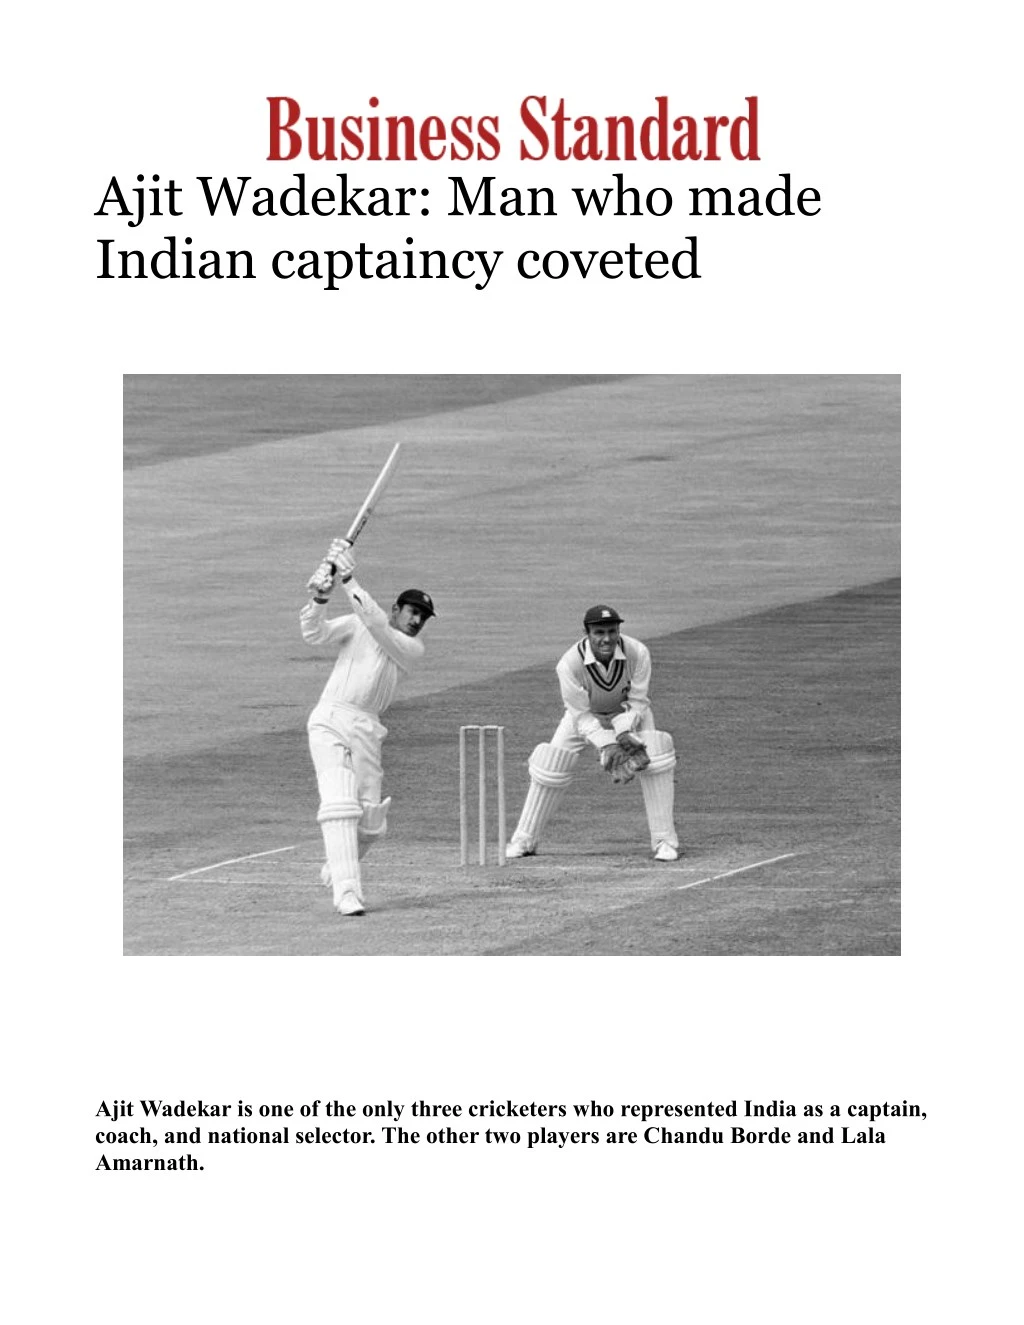 ajit wadekar man who made indian captaincy coveted